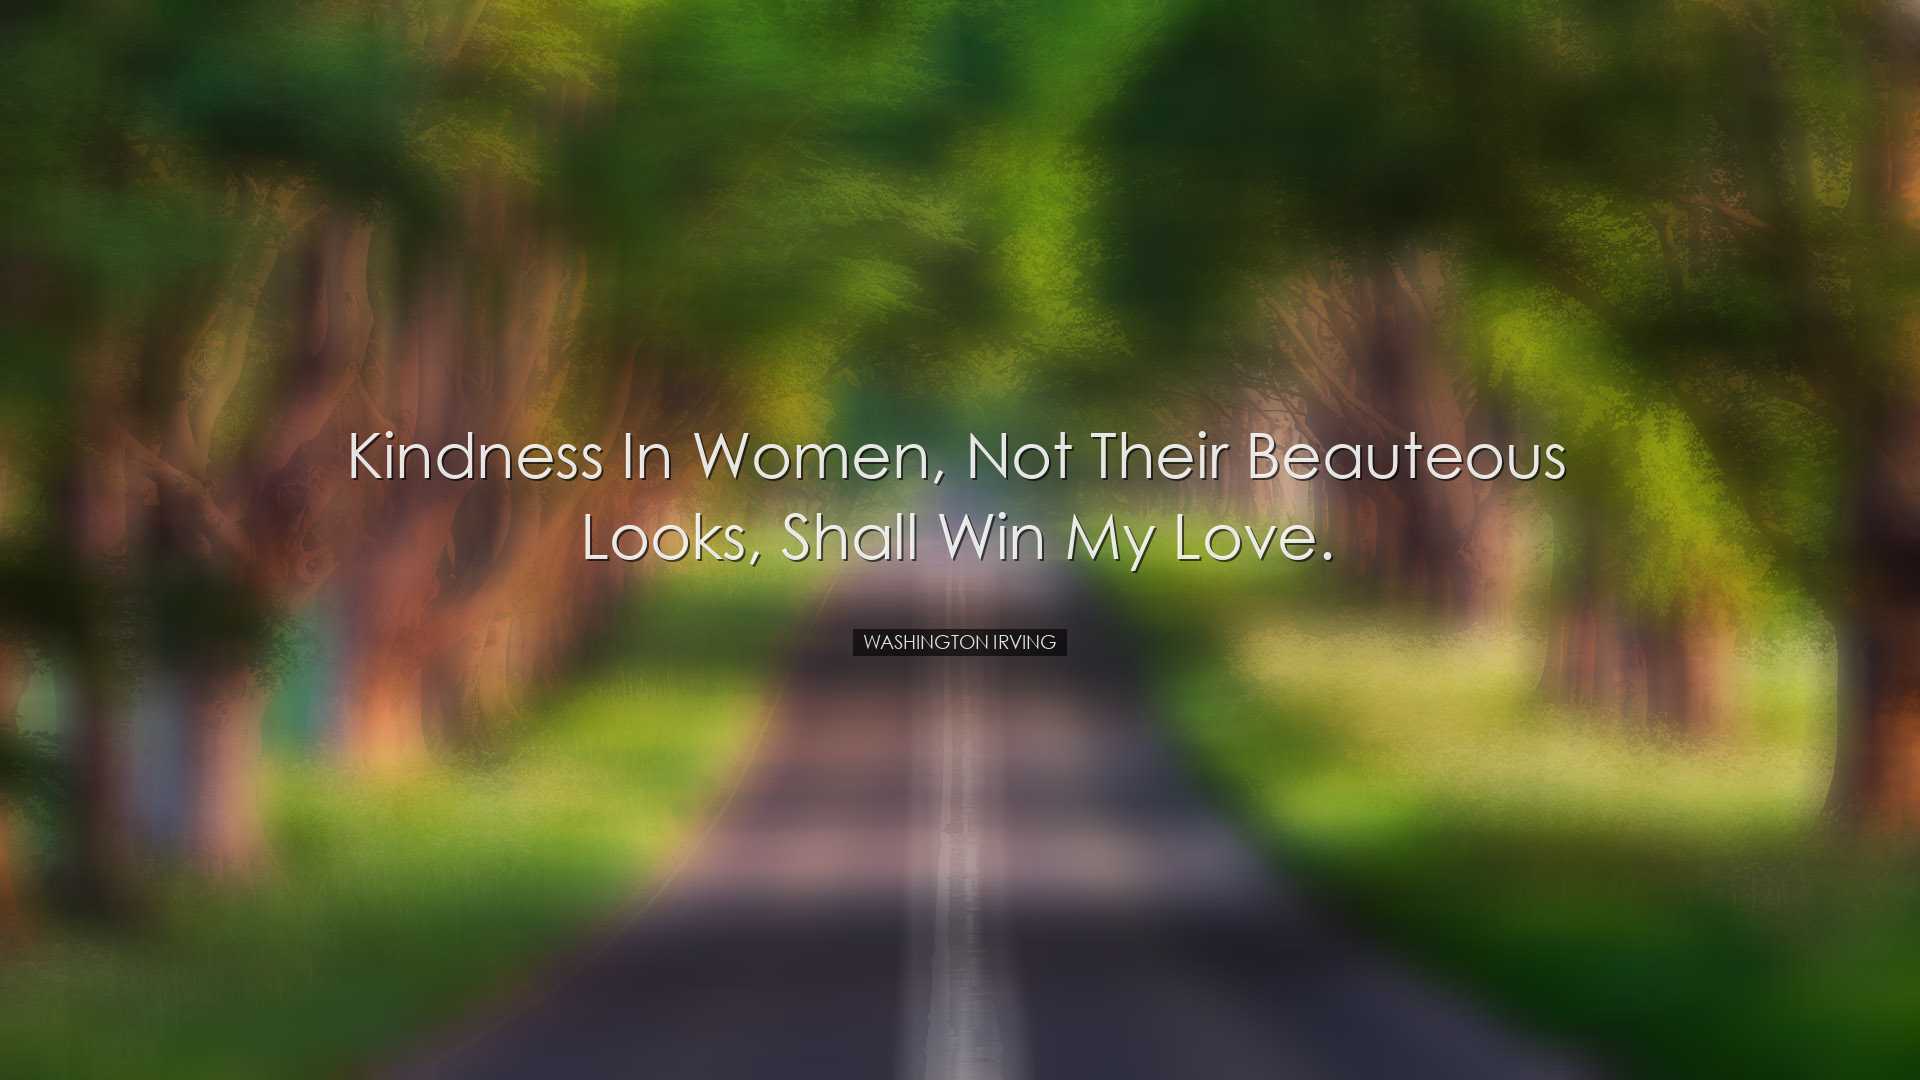 Kindness in women, not their beauteous looks, shall win my love. -